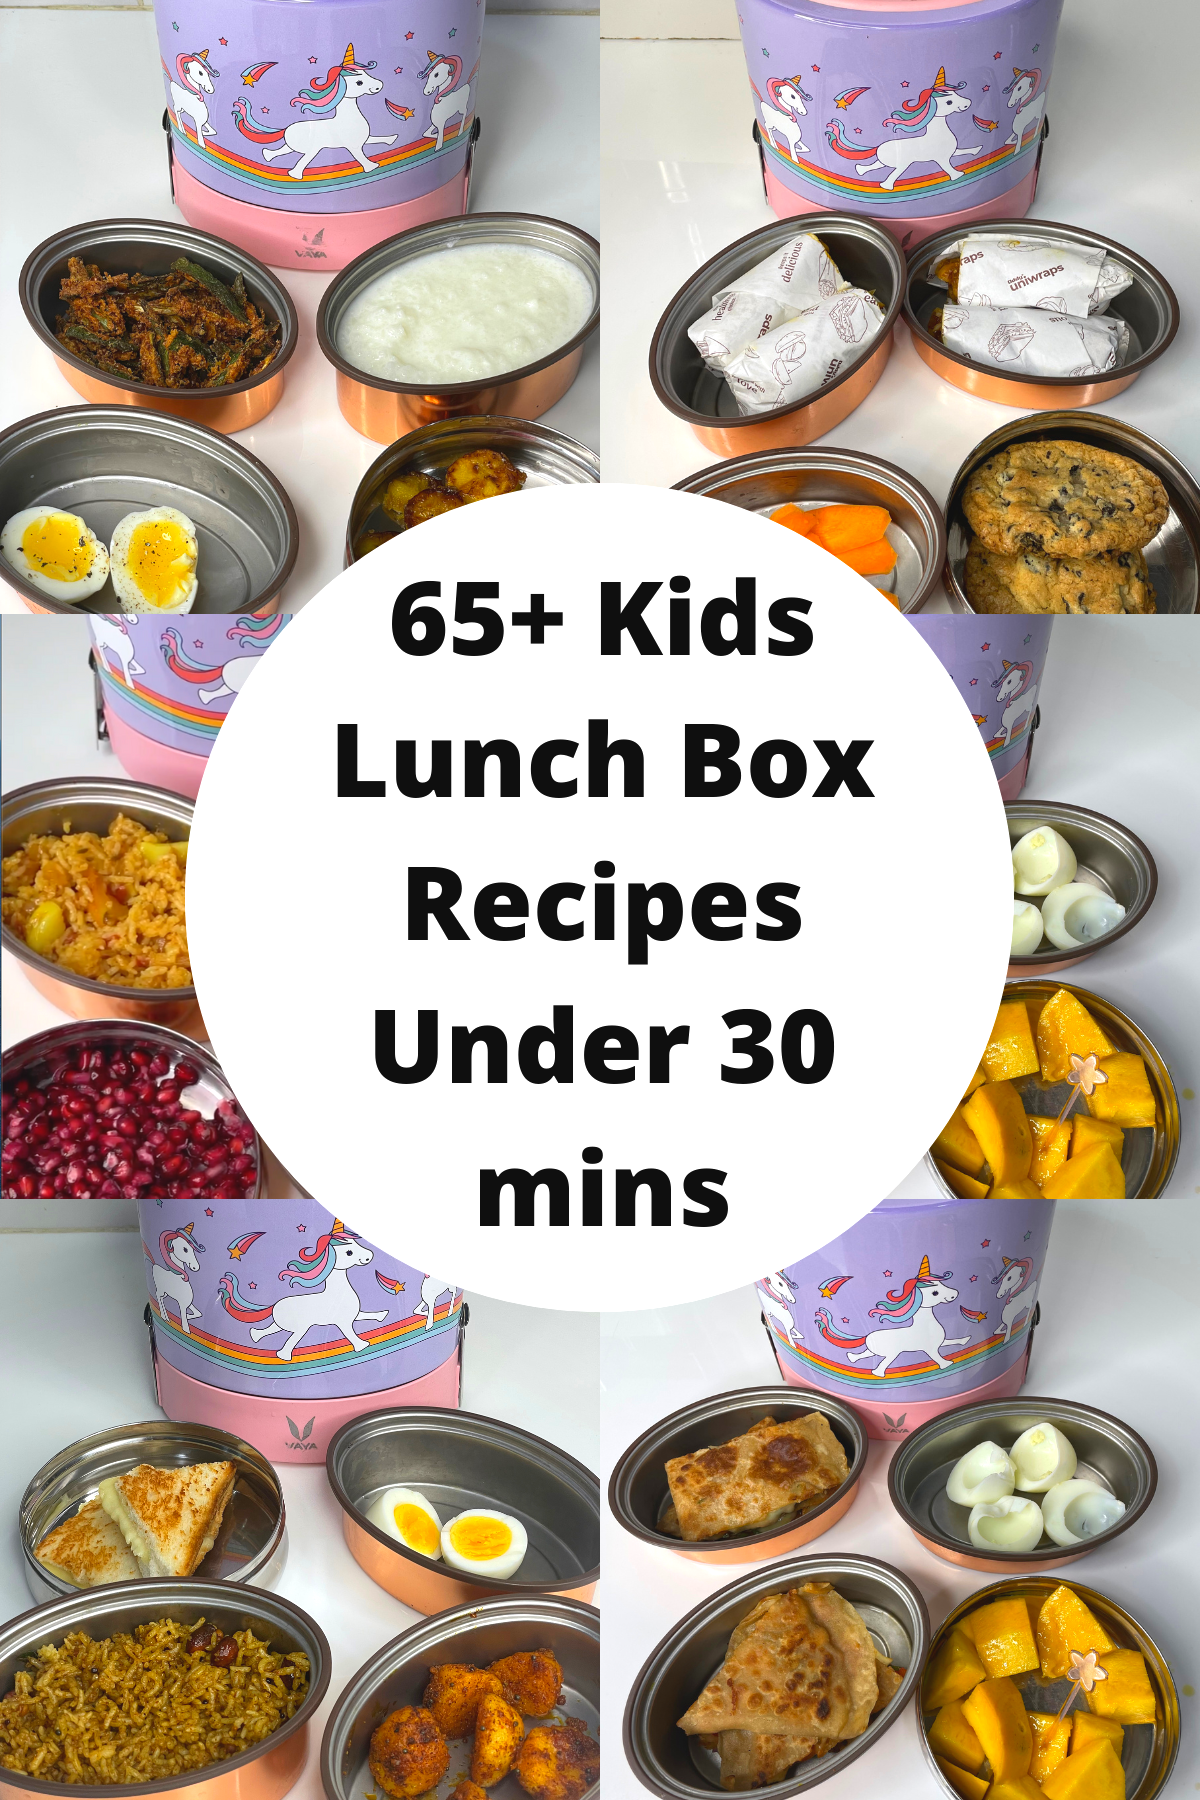 10 Thermos Ideas For A Healthy Lunch - Super Healthy Kids